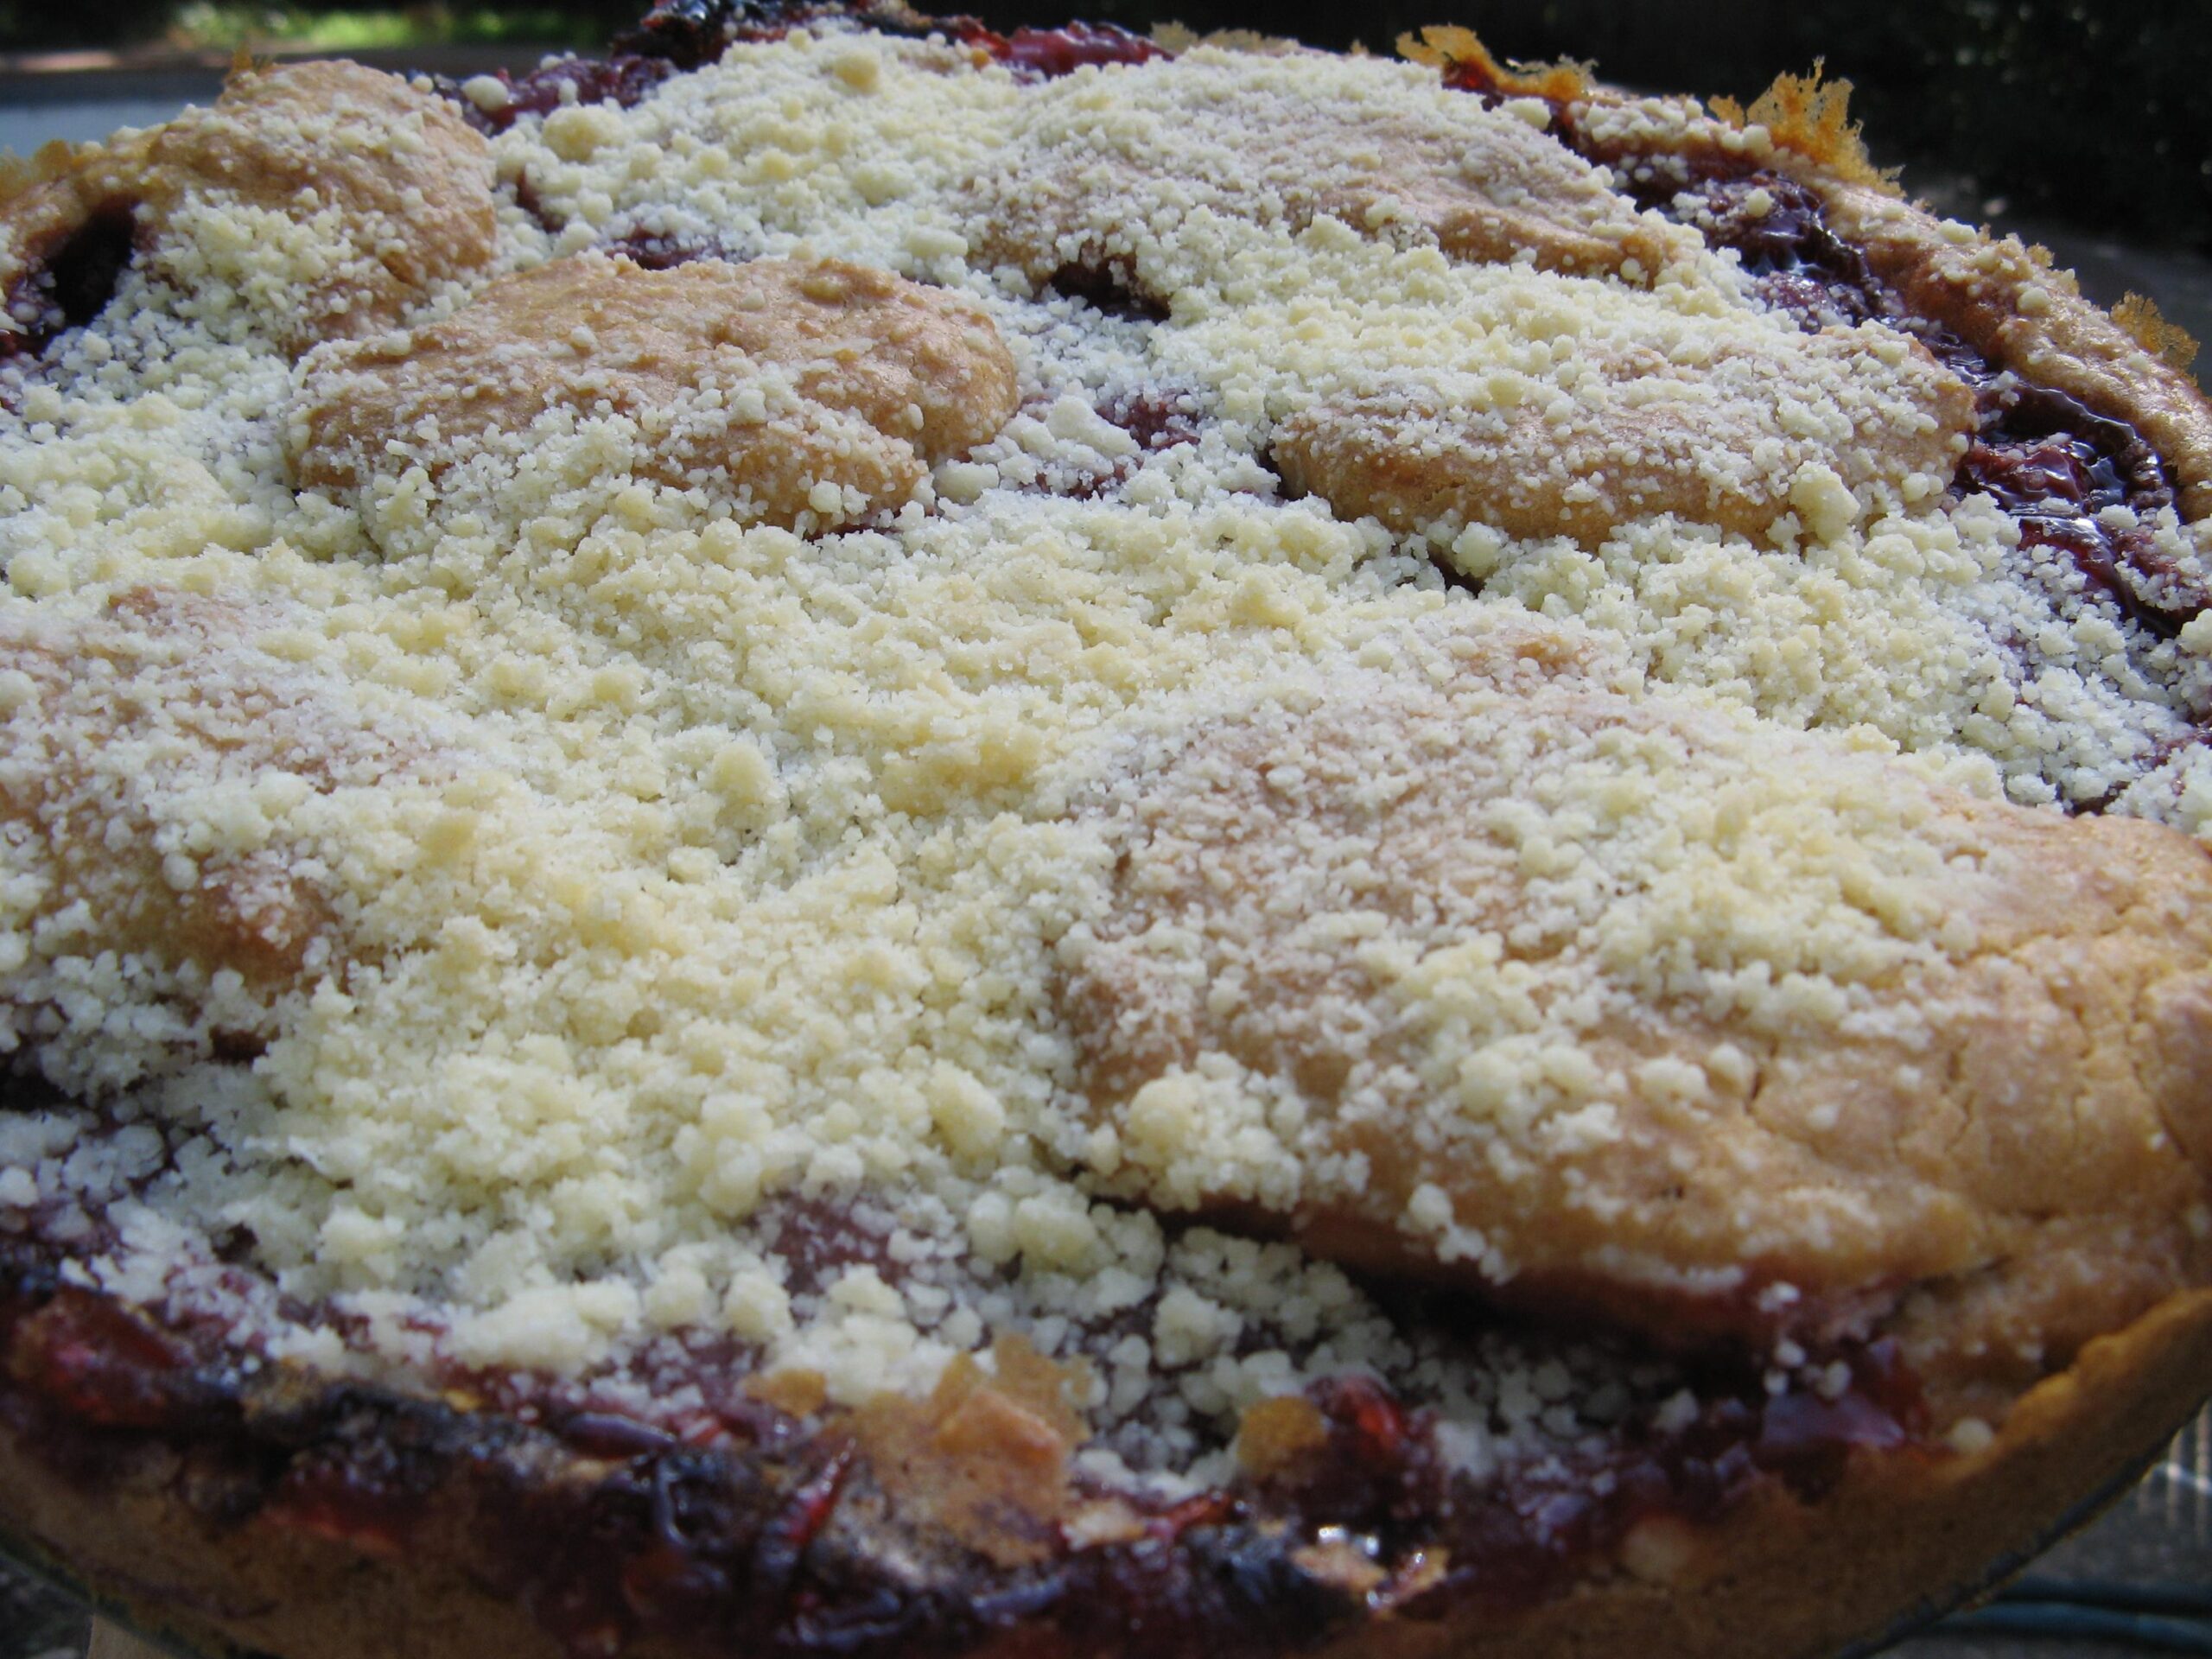  Juicy cherries and a crunchy streusel topping make this coffee cake irresistible!